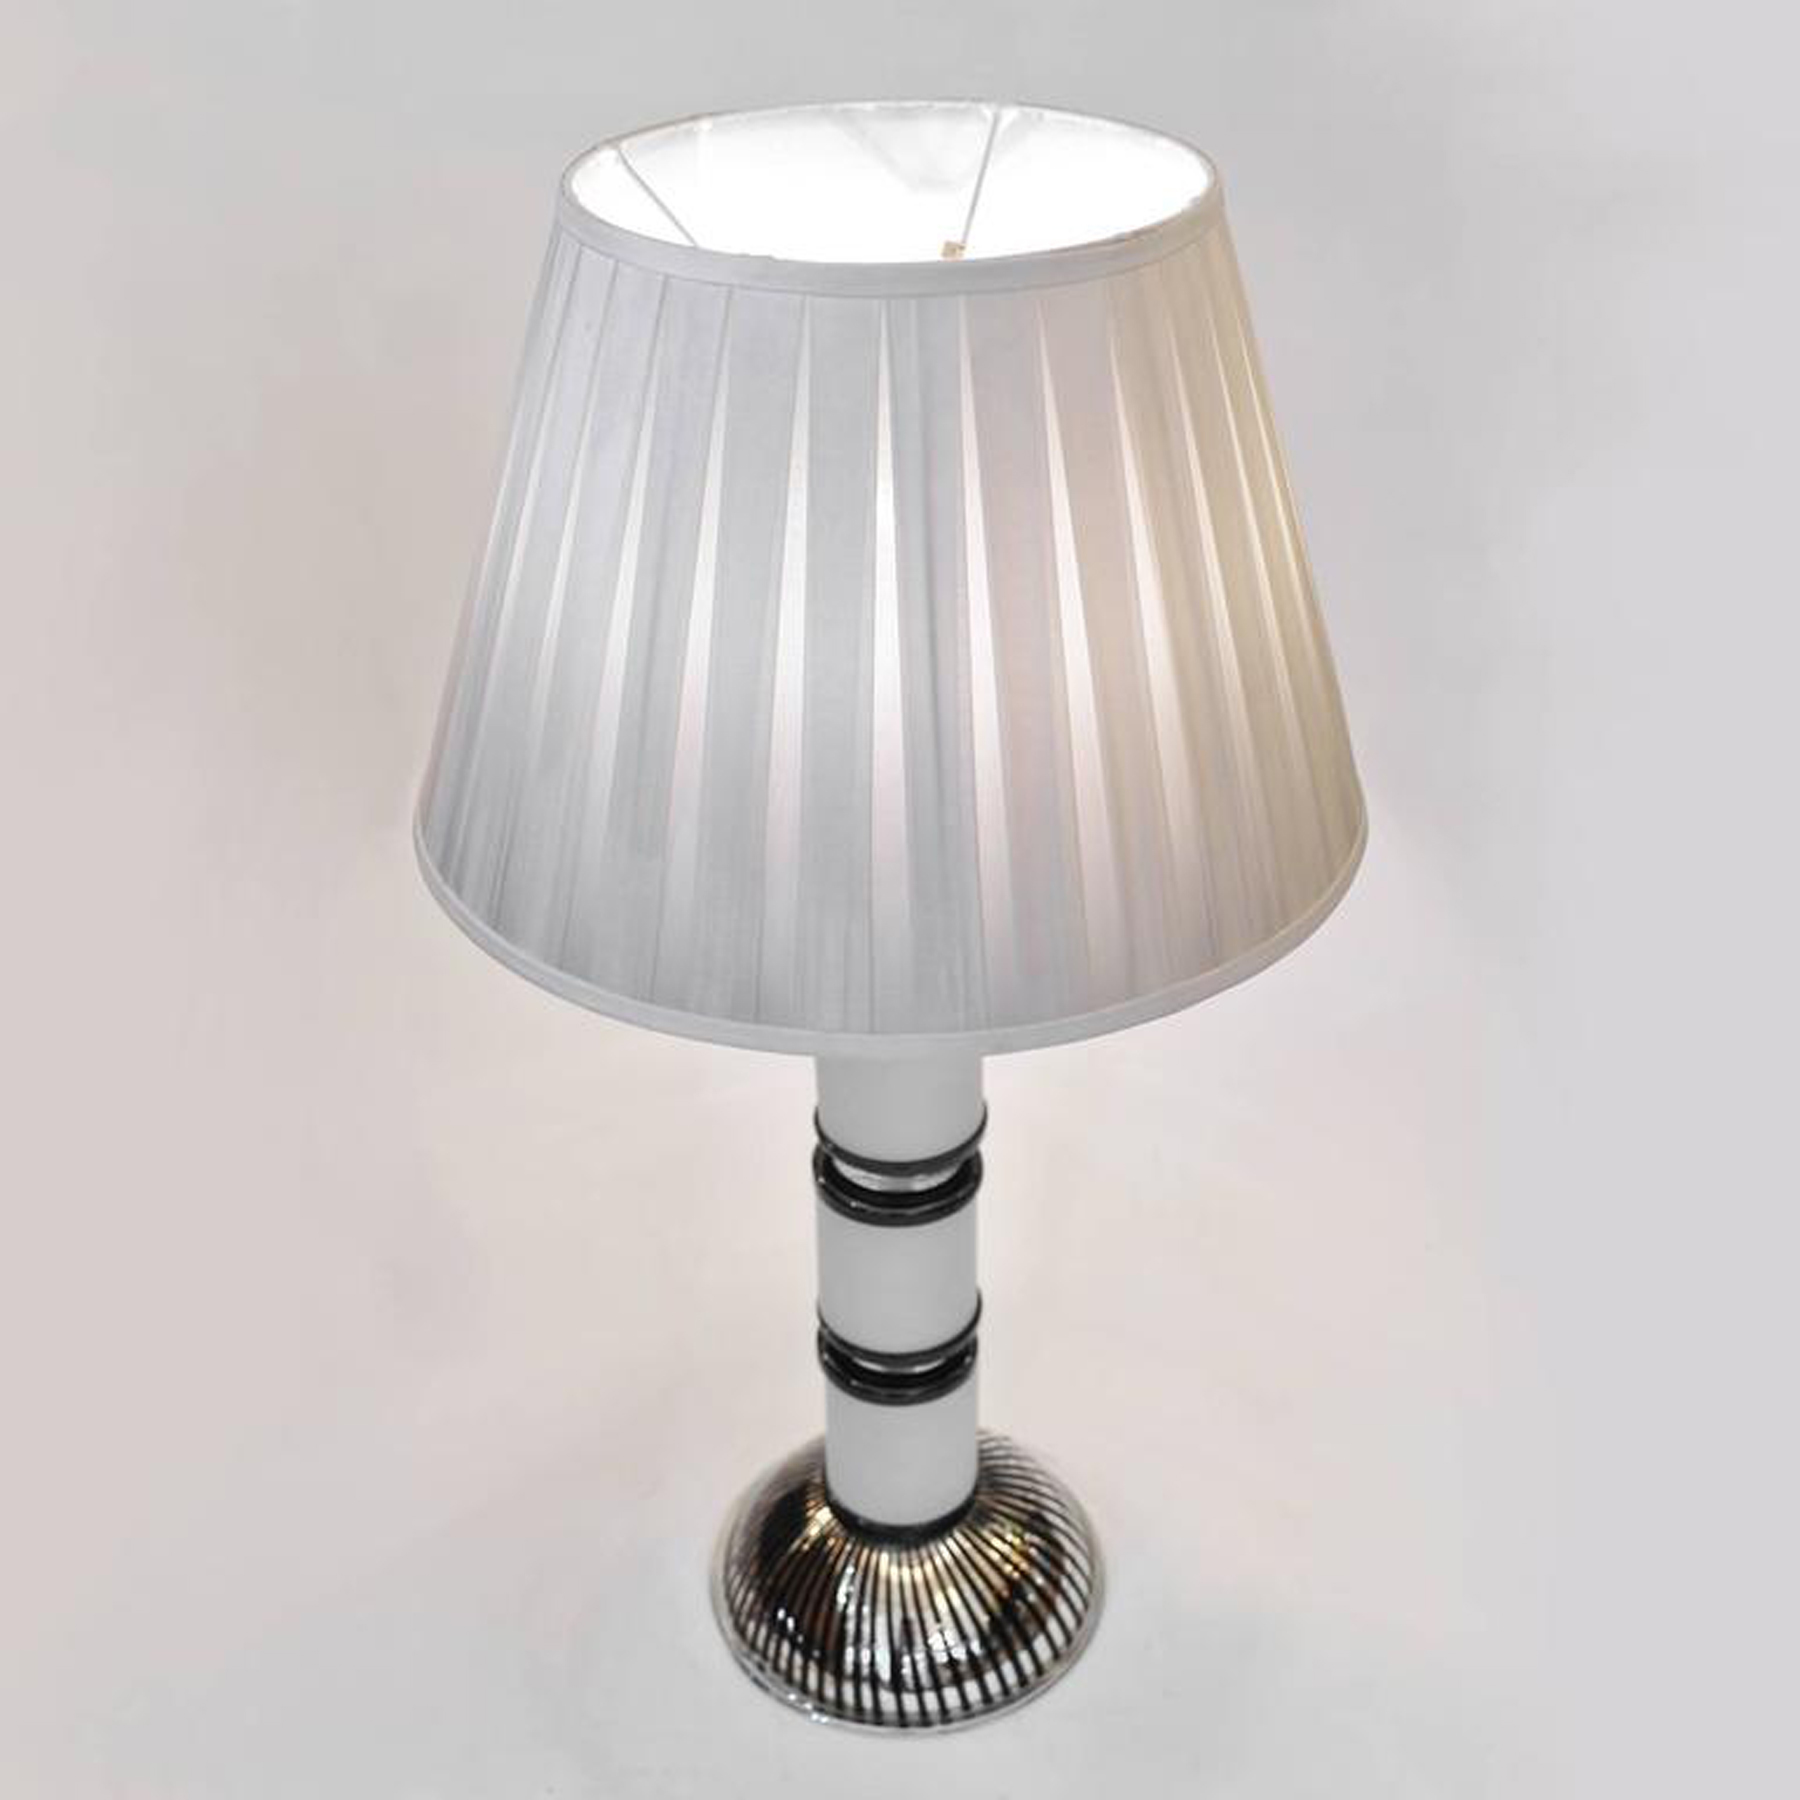 Black And White Lamps 01 L